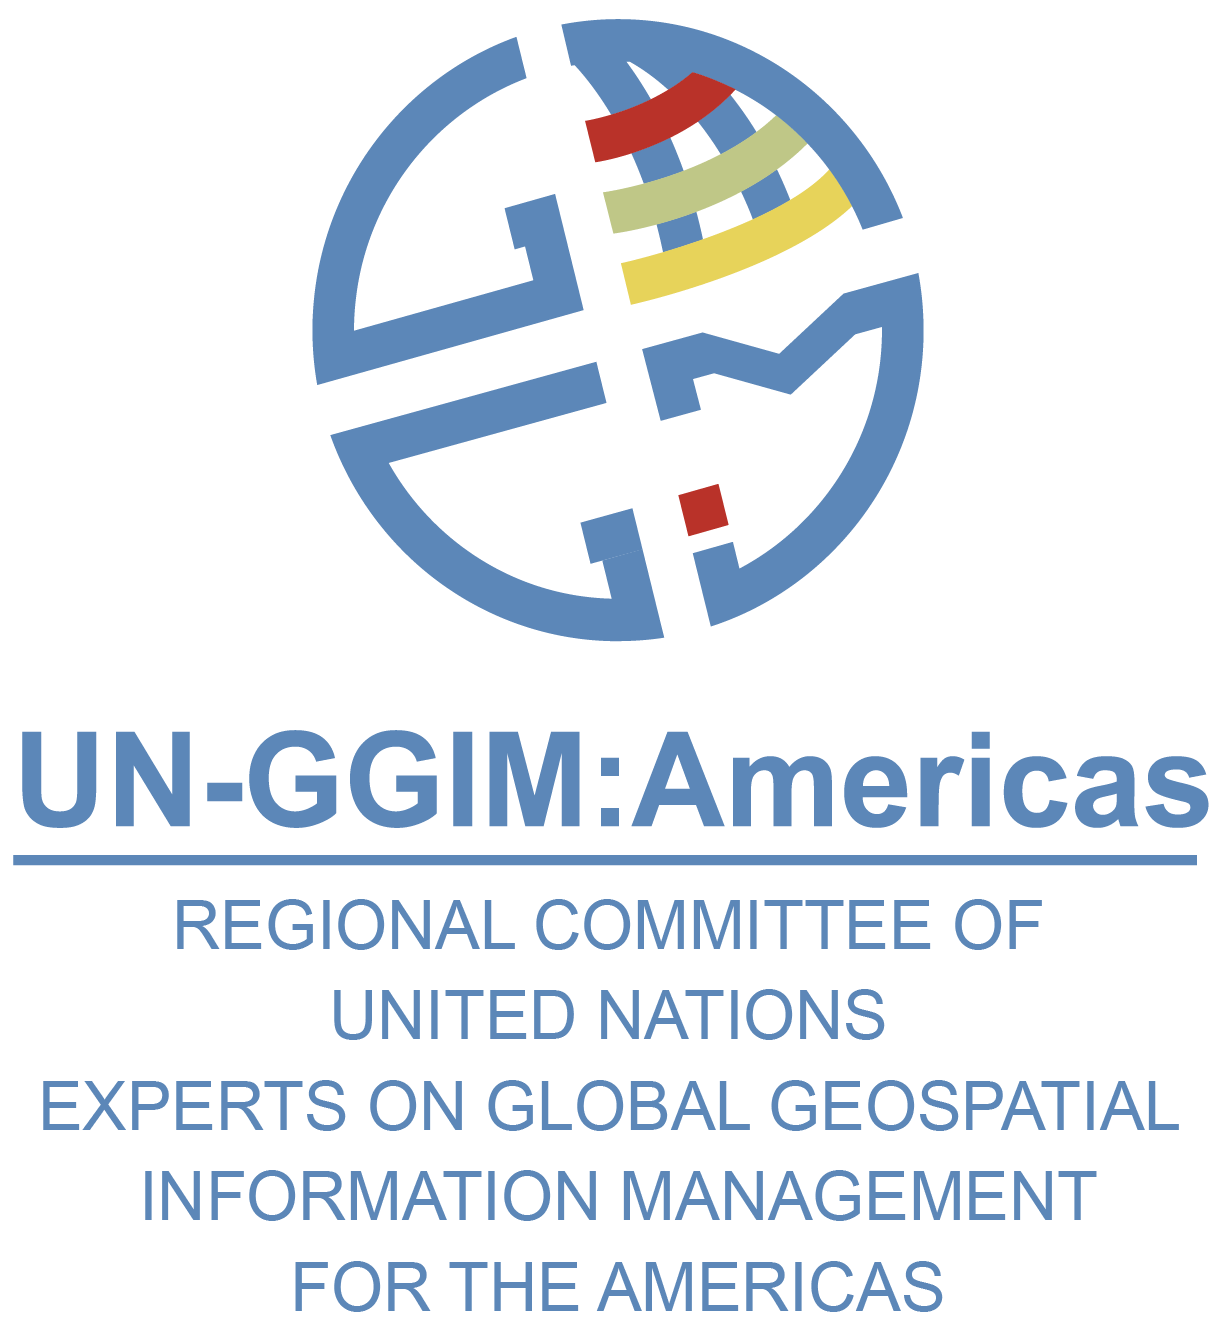 United Nations Regional Committee for Global Geospatial Information Management for the Americas